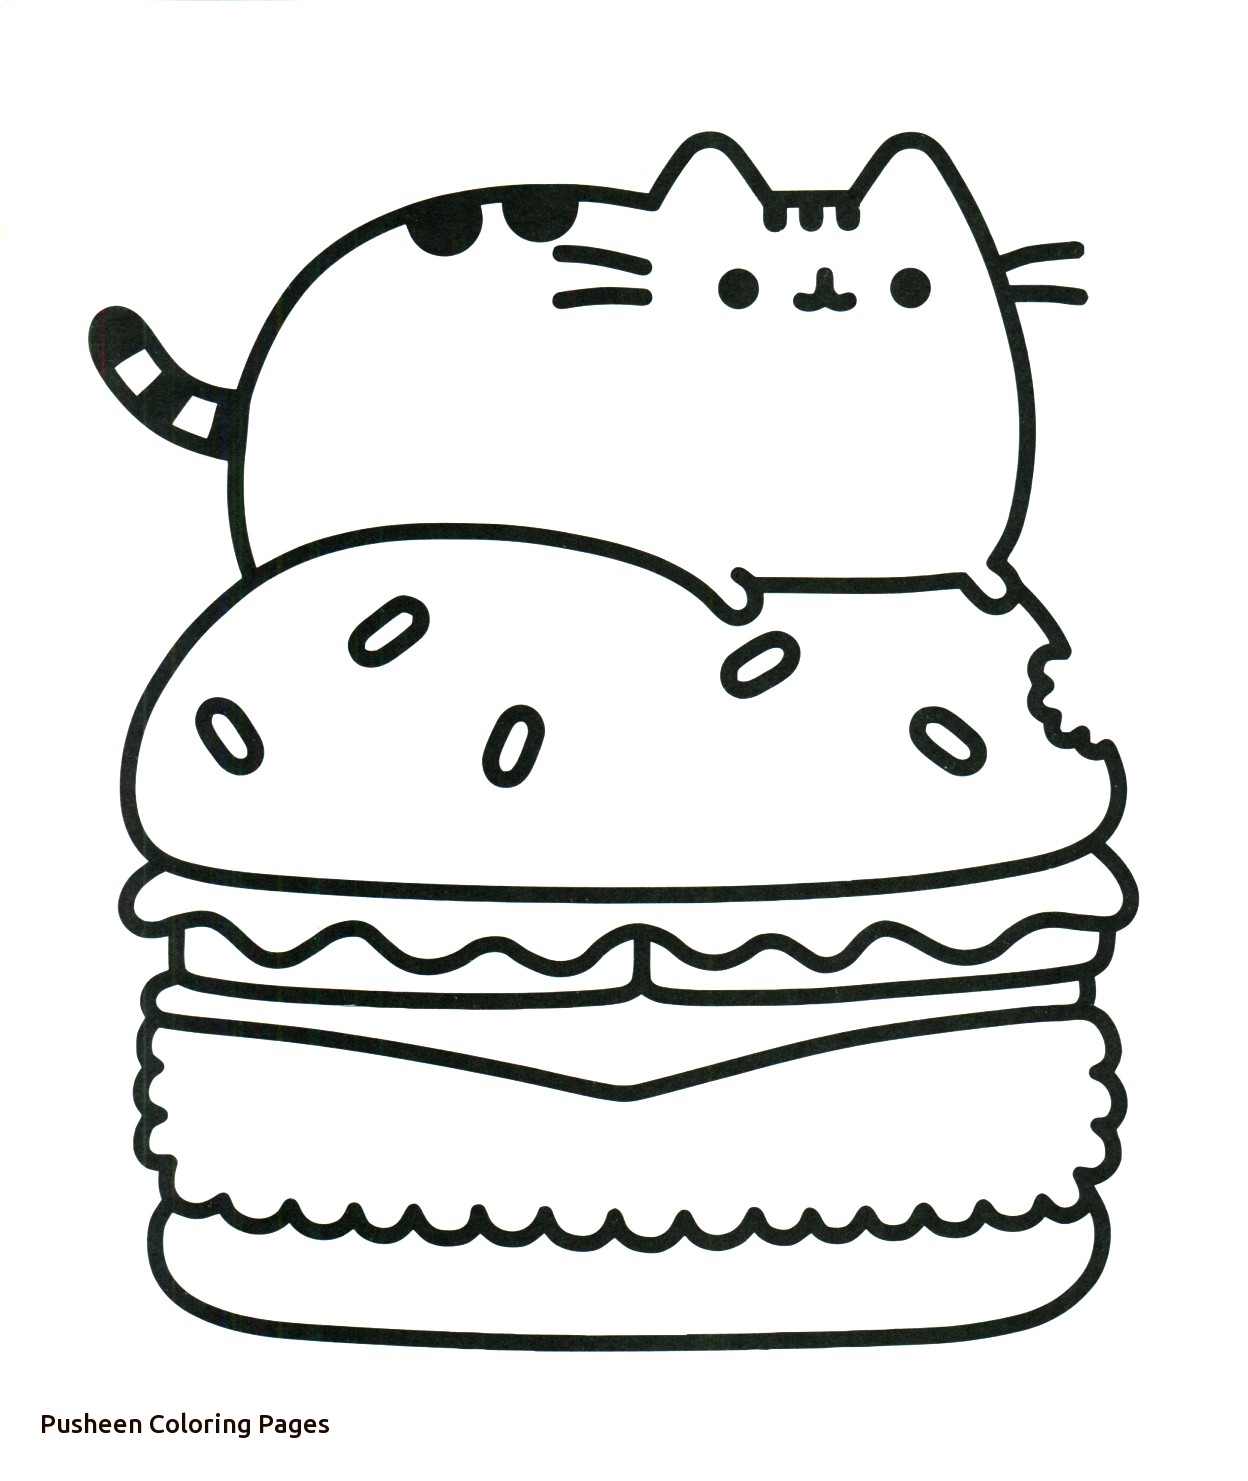 Kawaii Pusheen Double To Coloring Pages